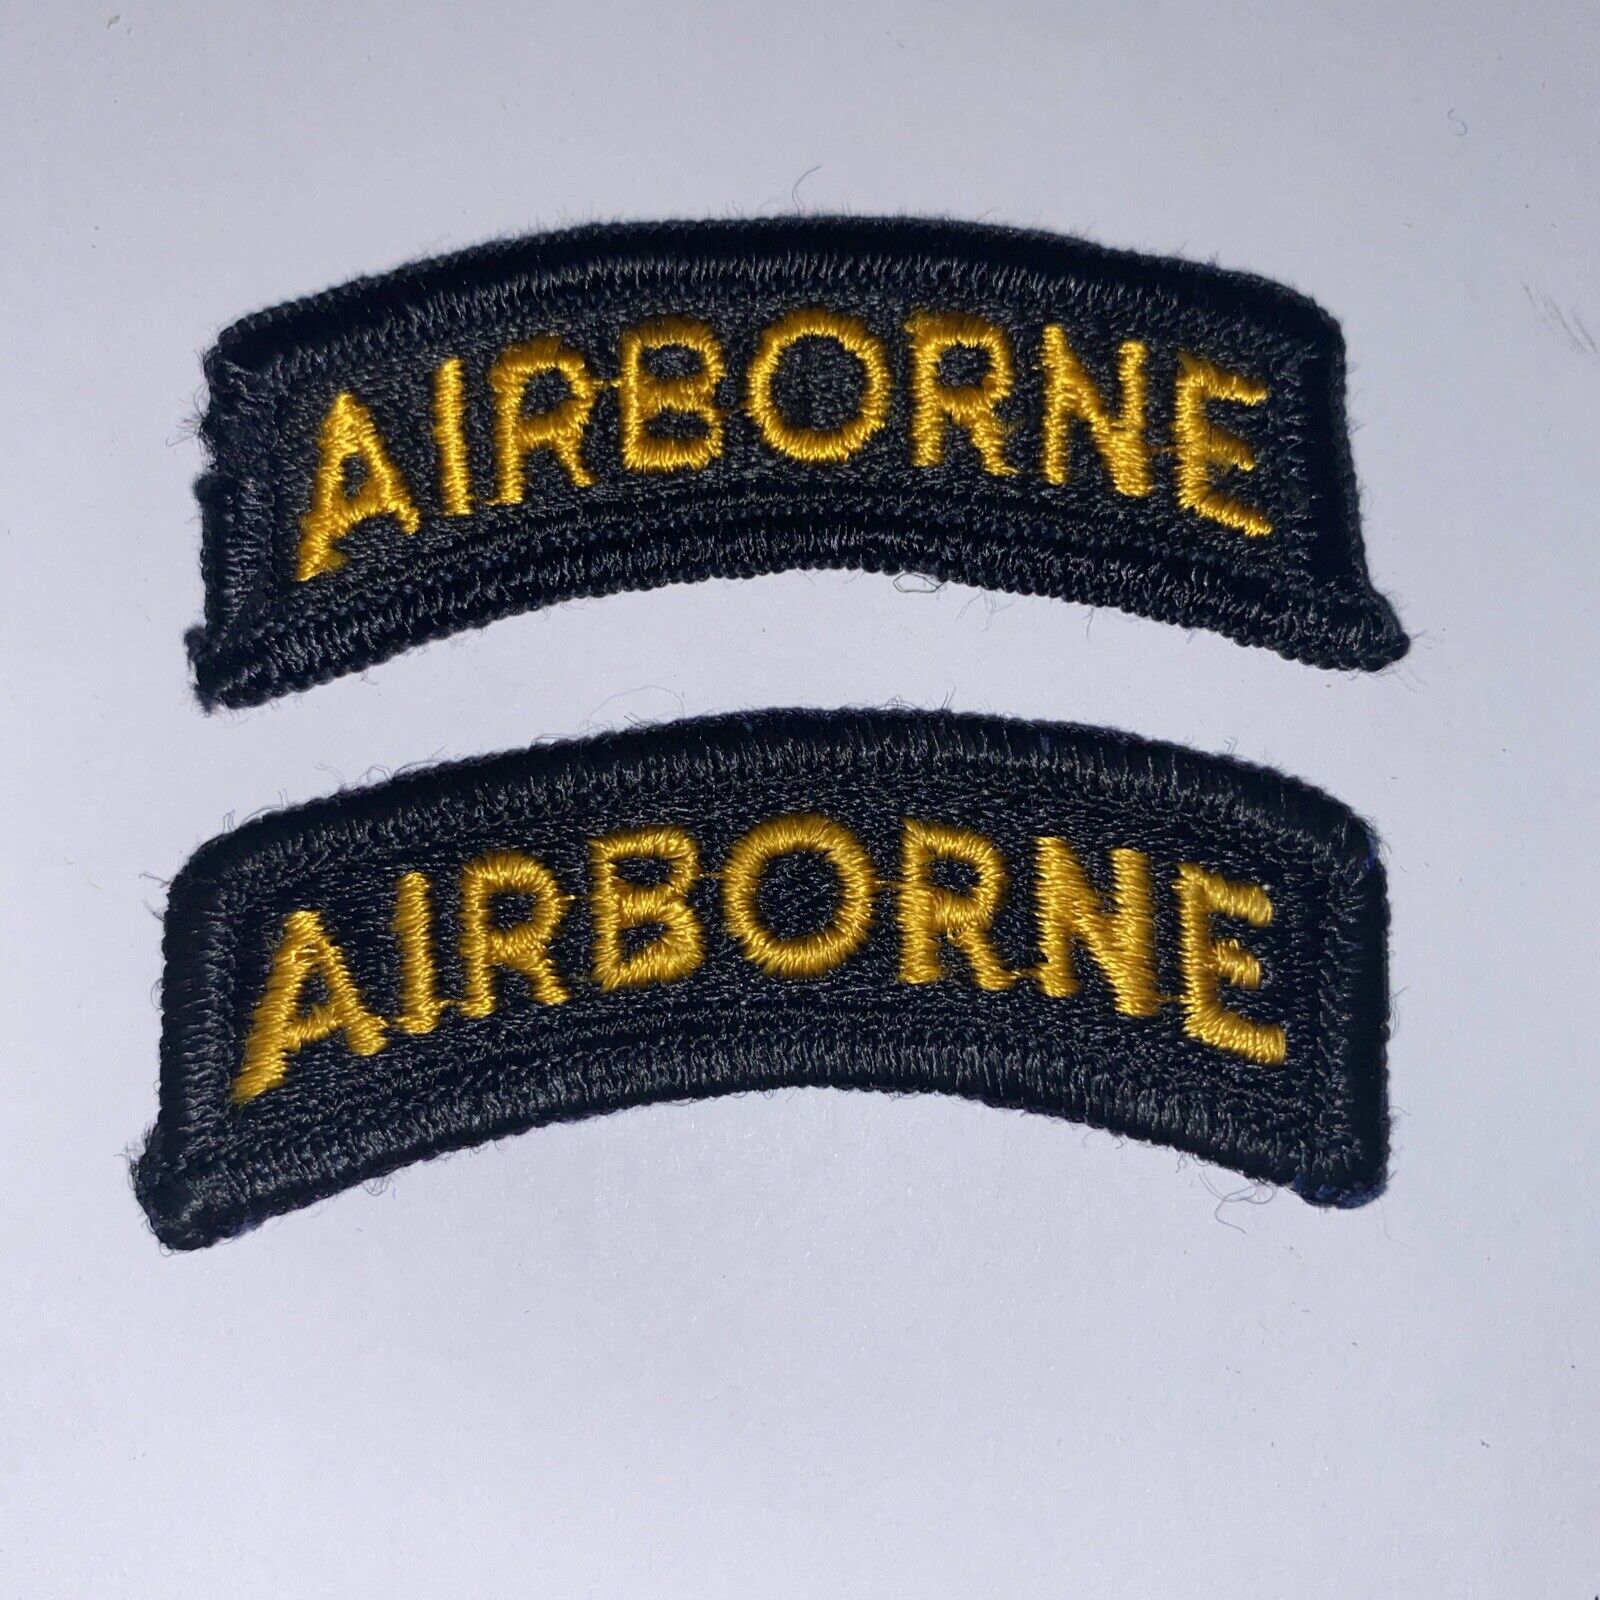 1960s US Army Paratrooper Airborne Infantry Tab Patch Pair L@@K Black & Gold,